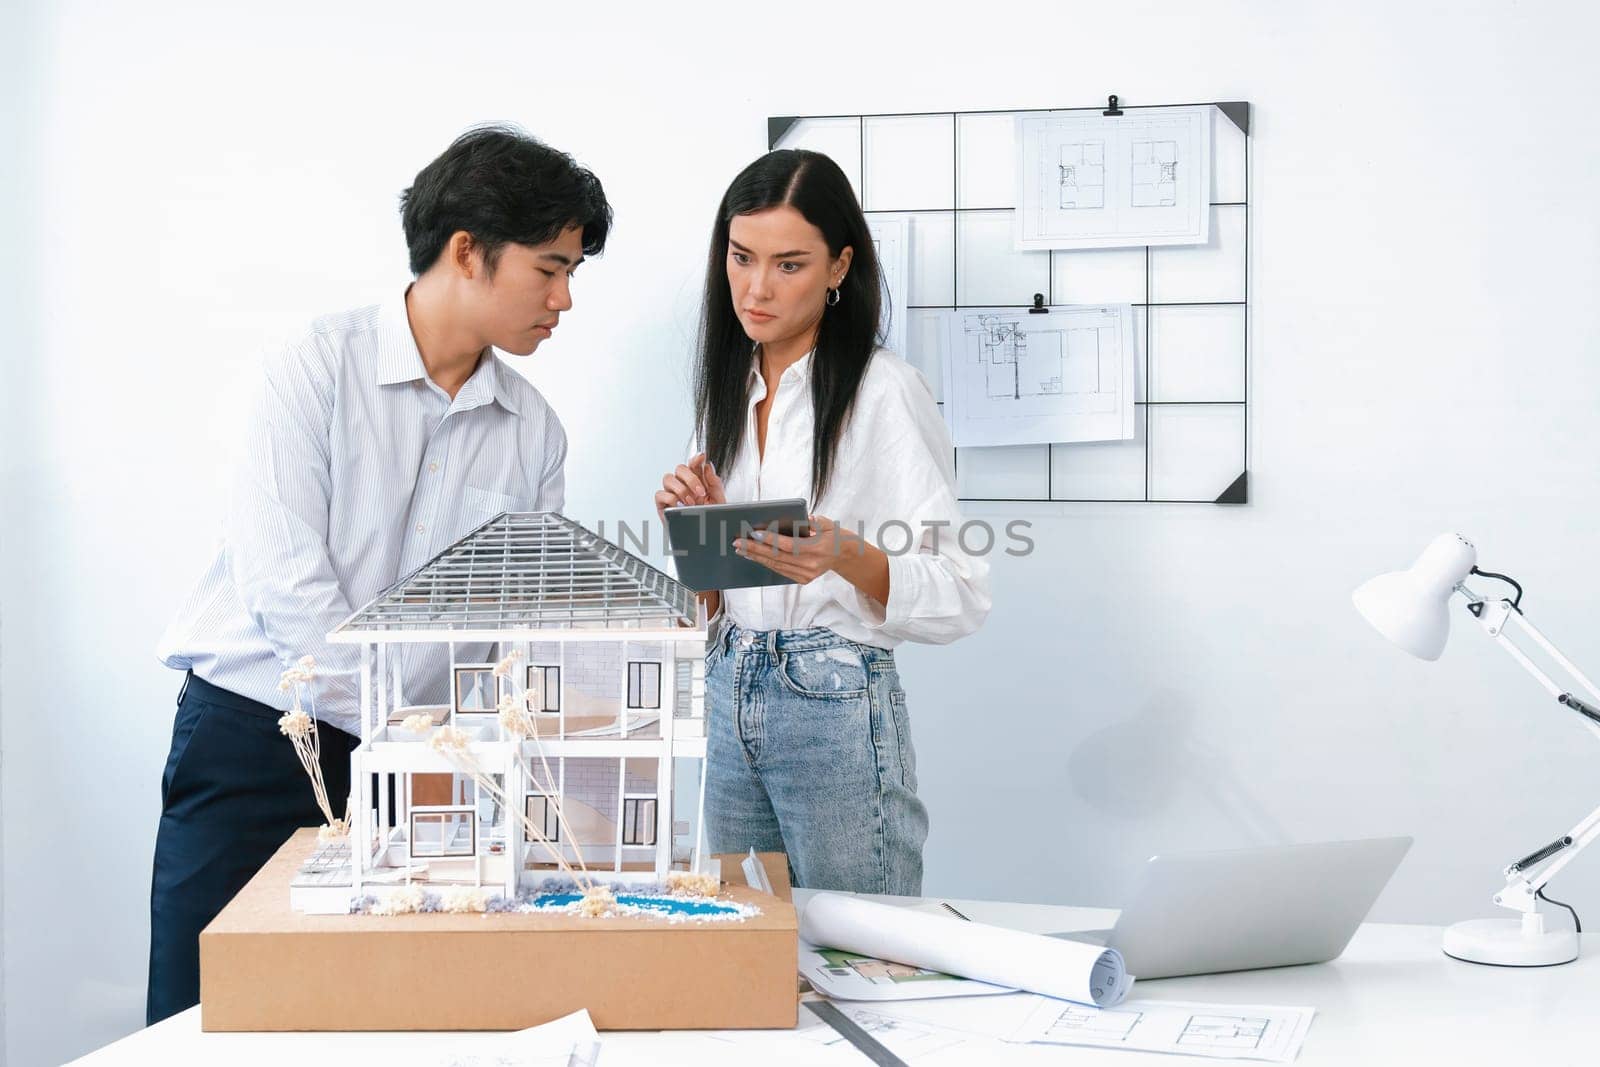 Beautiful young caucasian project manager tells asian engineer about building detail by using tablet while engineer measuring house model on meeting table with blueprint scatter around. Immaculate